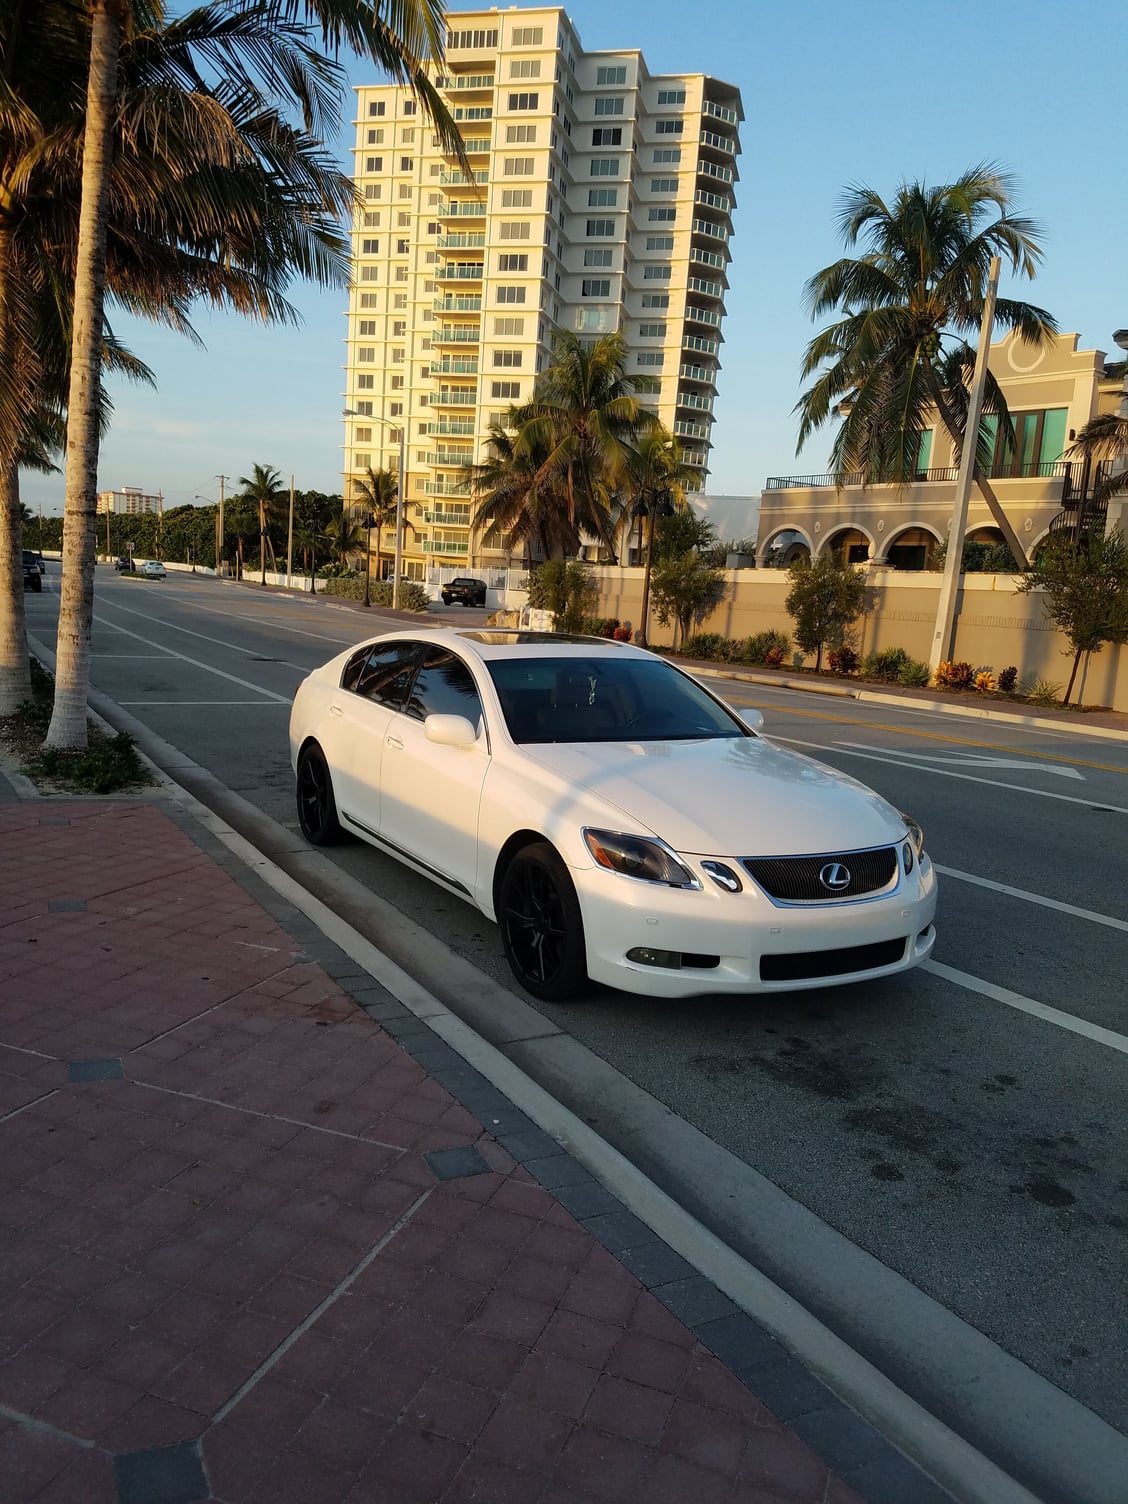 2006 Lexus GS430 - 2006 gs 430 - Used - VIN JTHBN96SX65004431 - 97,000 Miles - 8 cyl - 2WD - Automatic - Sedan - White - Ft Lauderdale, FL 33306, United States